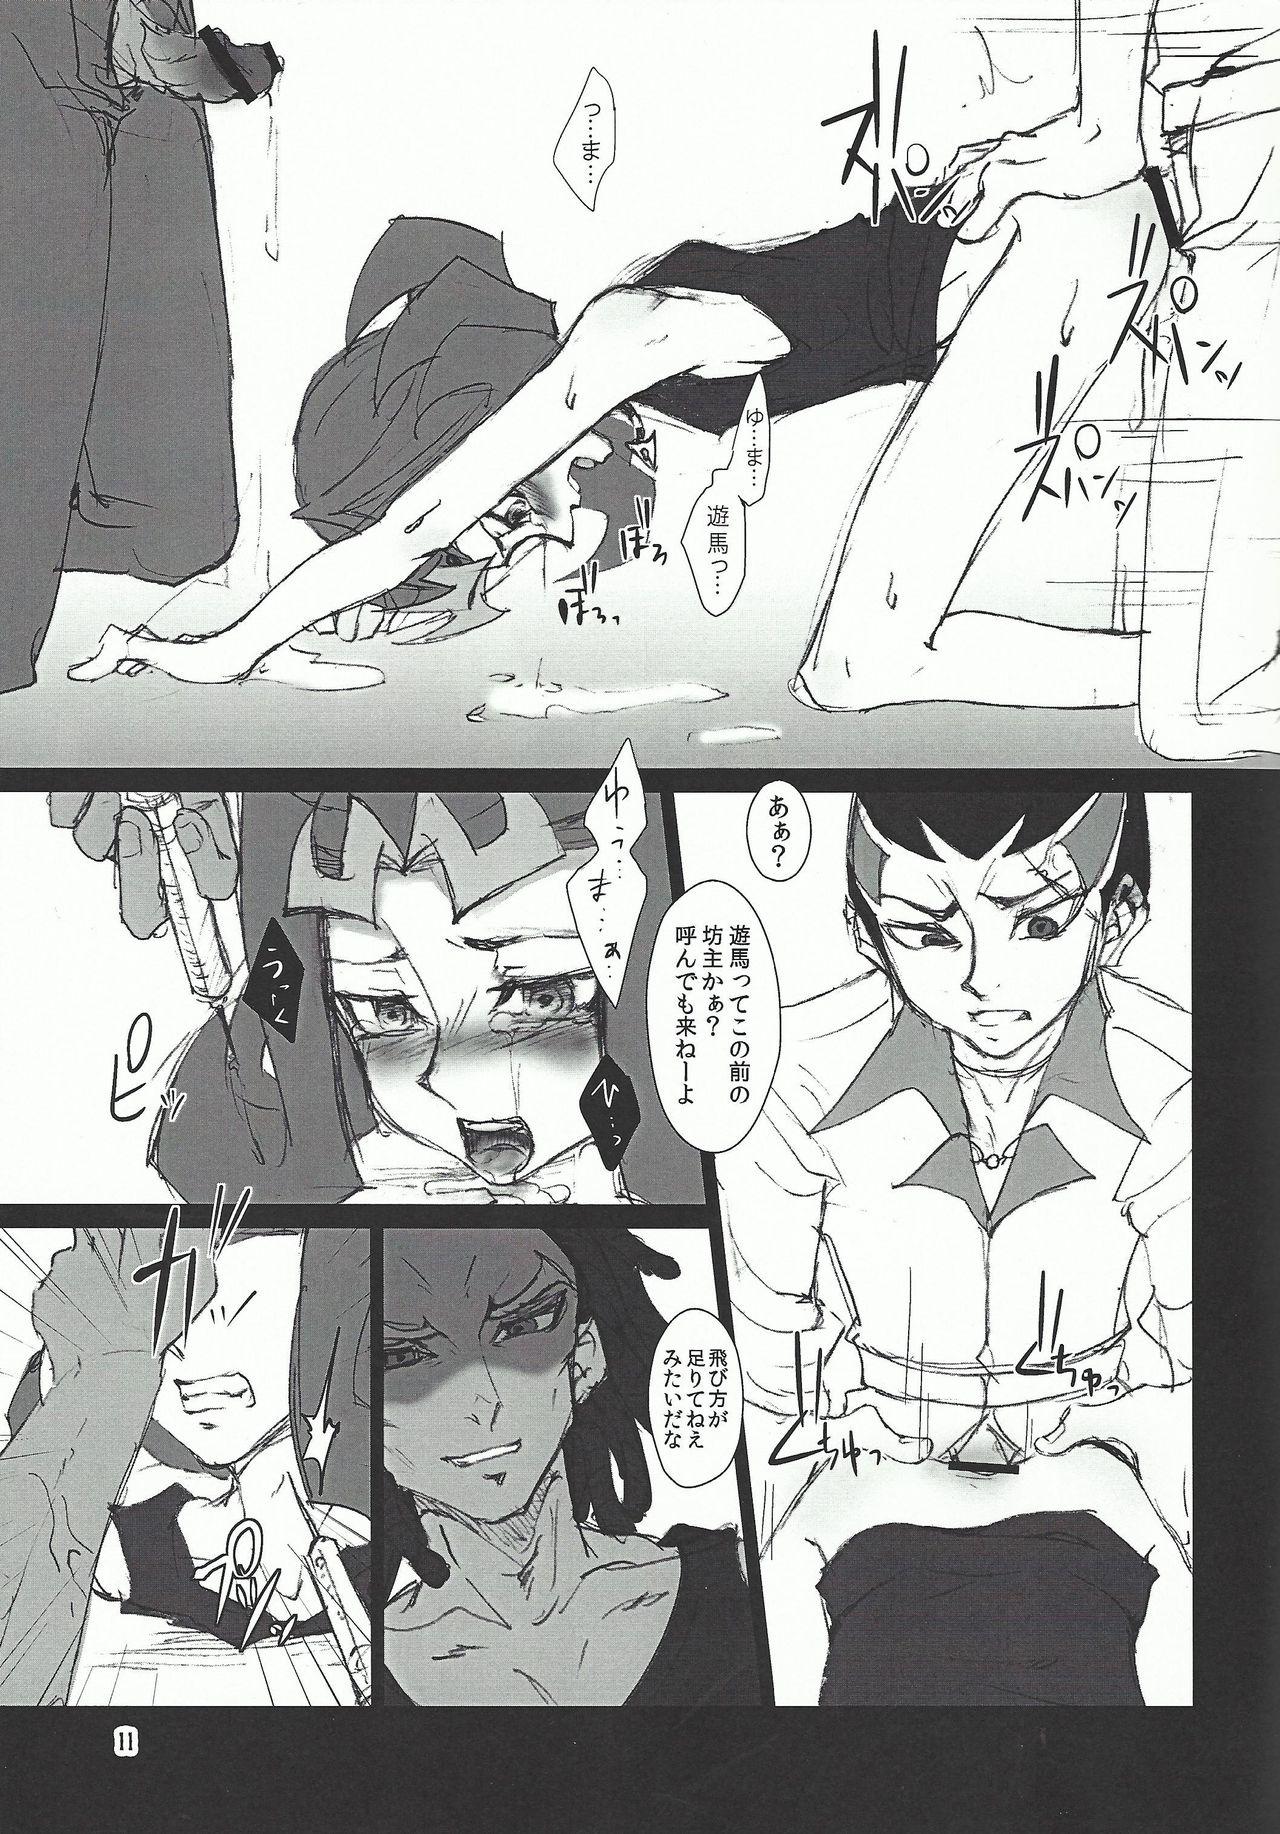 Tight Shark Dxxg - Yu-gi-oh zexal Yanks Featured - Page 10